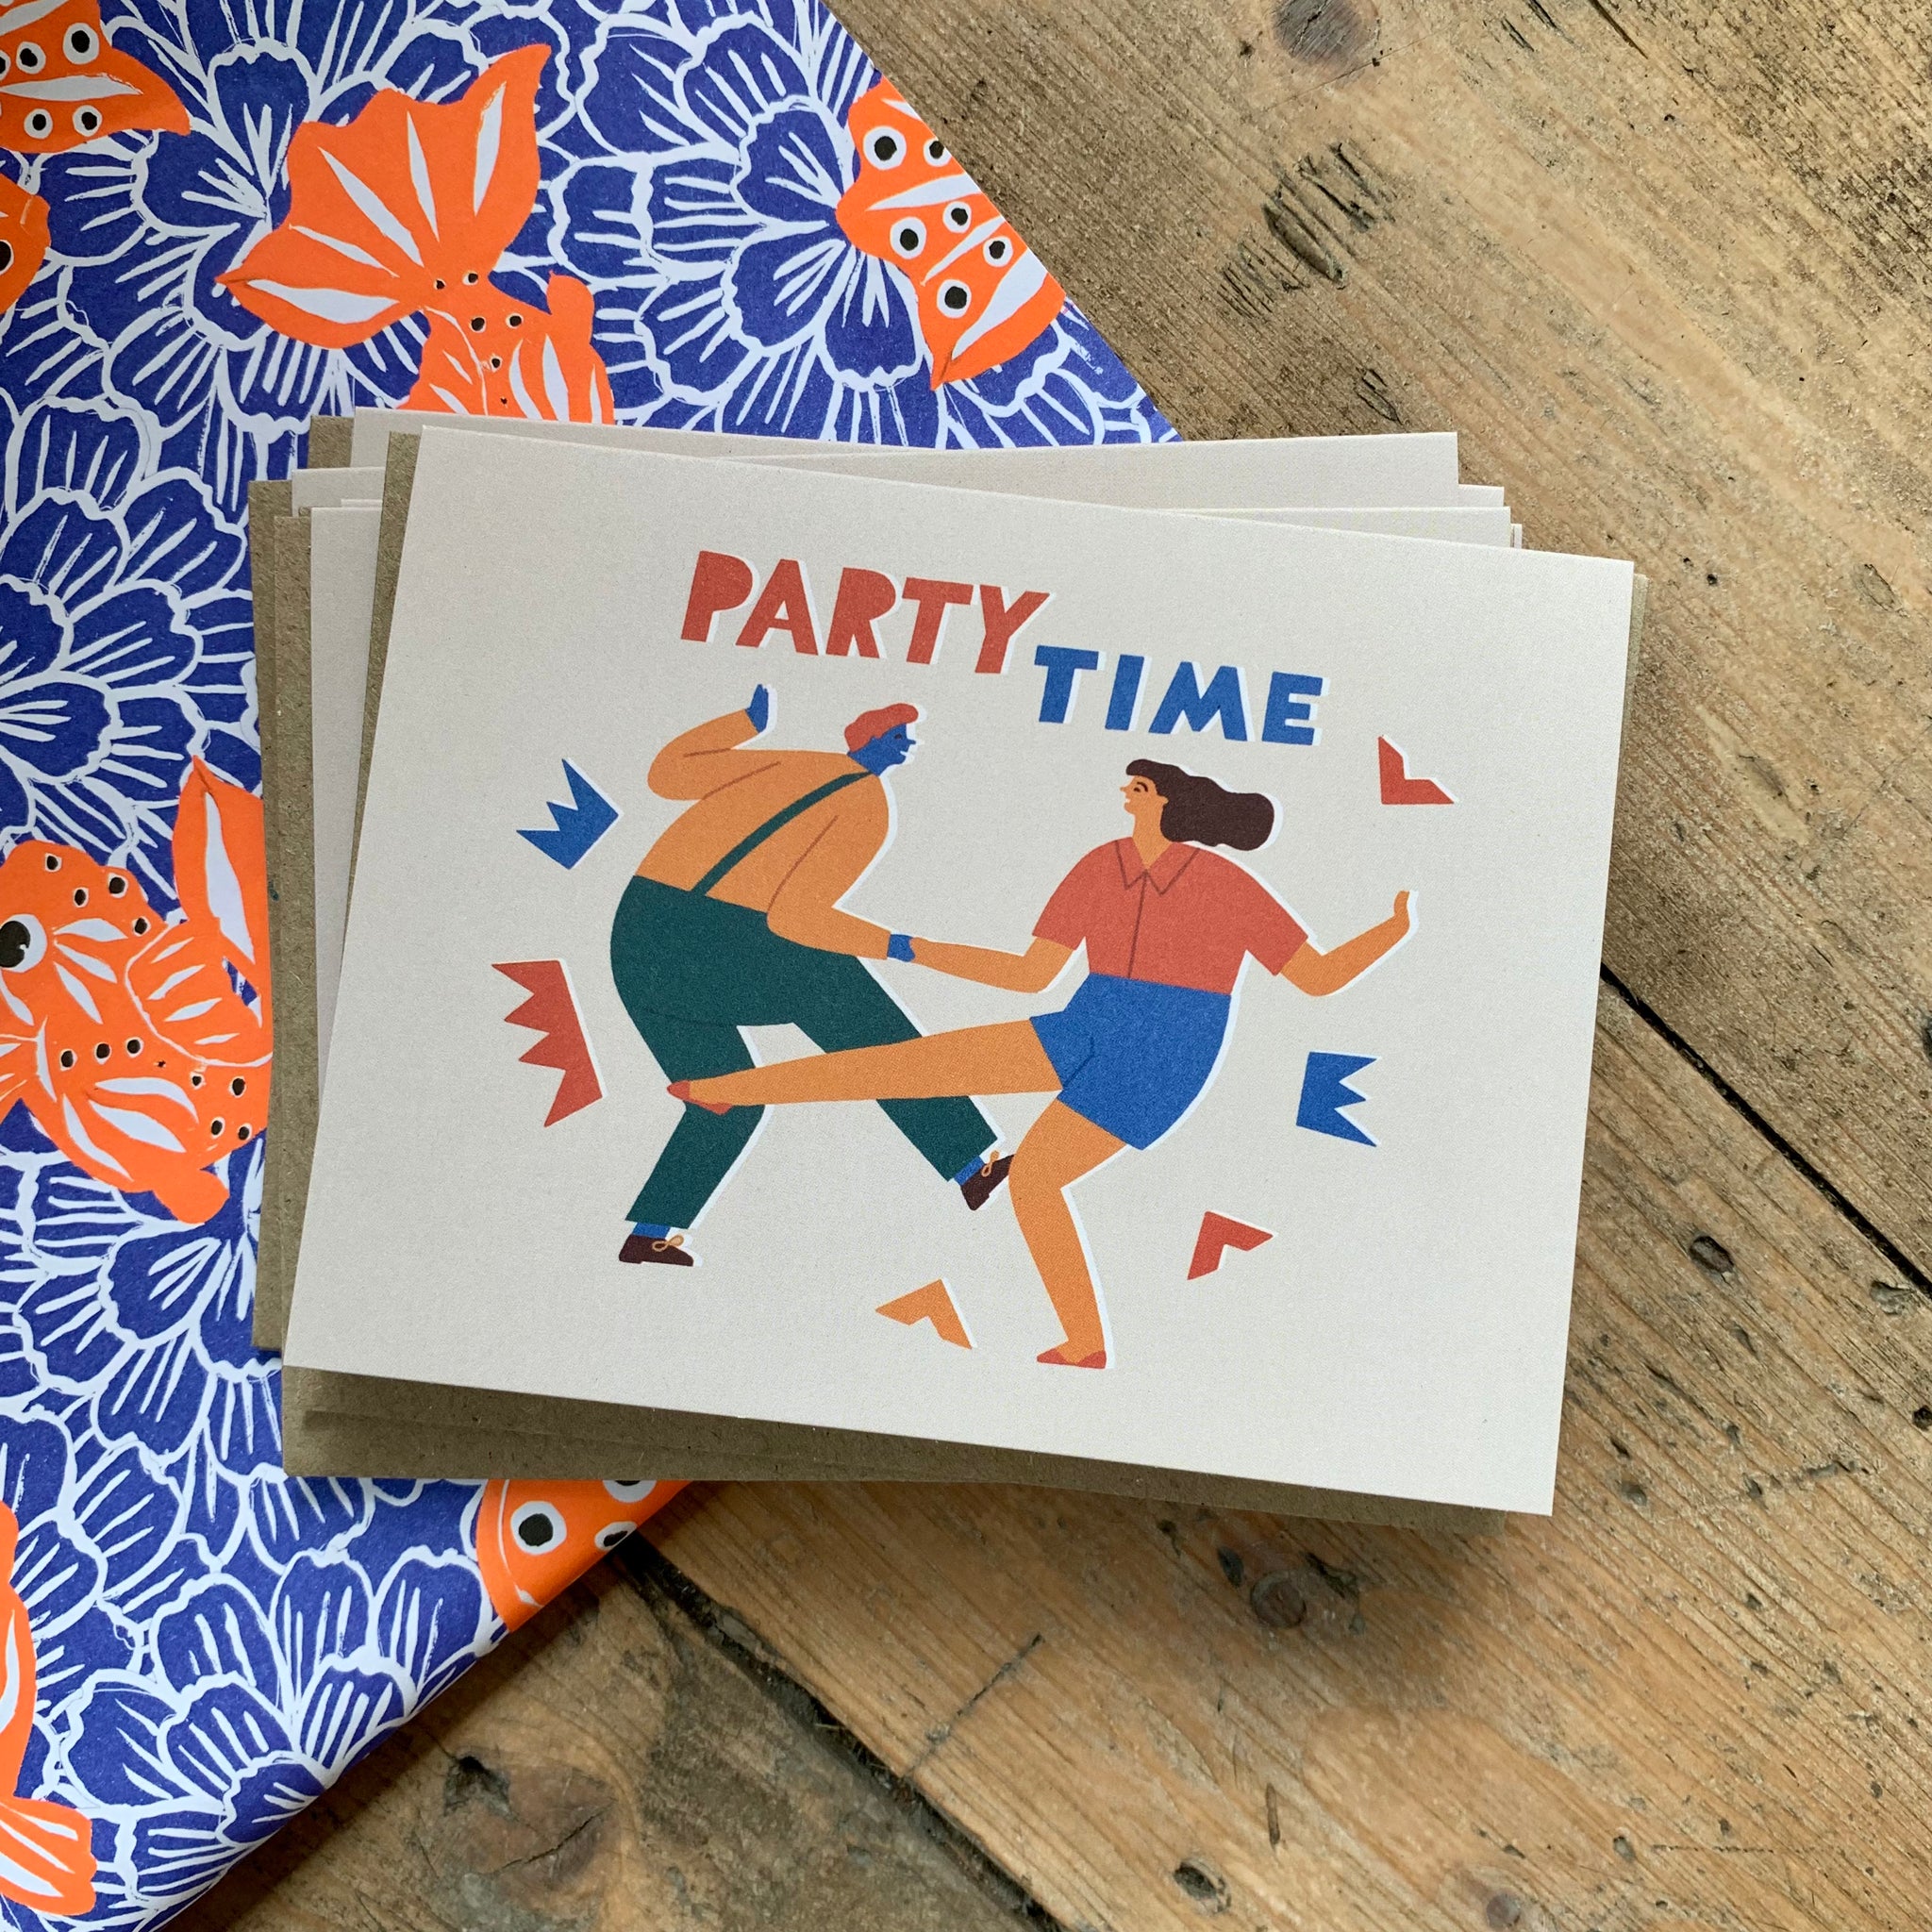 Party Time card from Egg Press